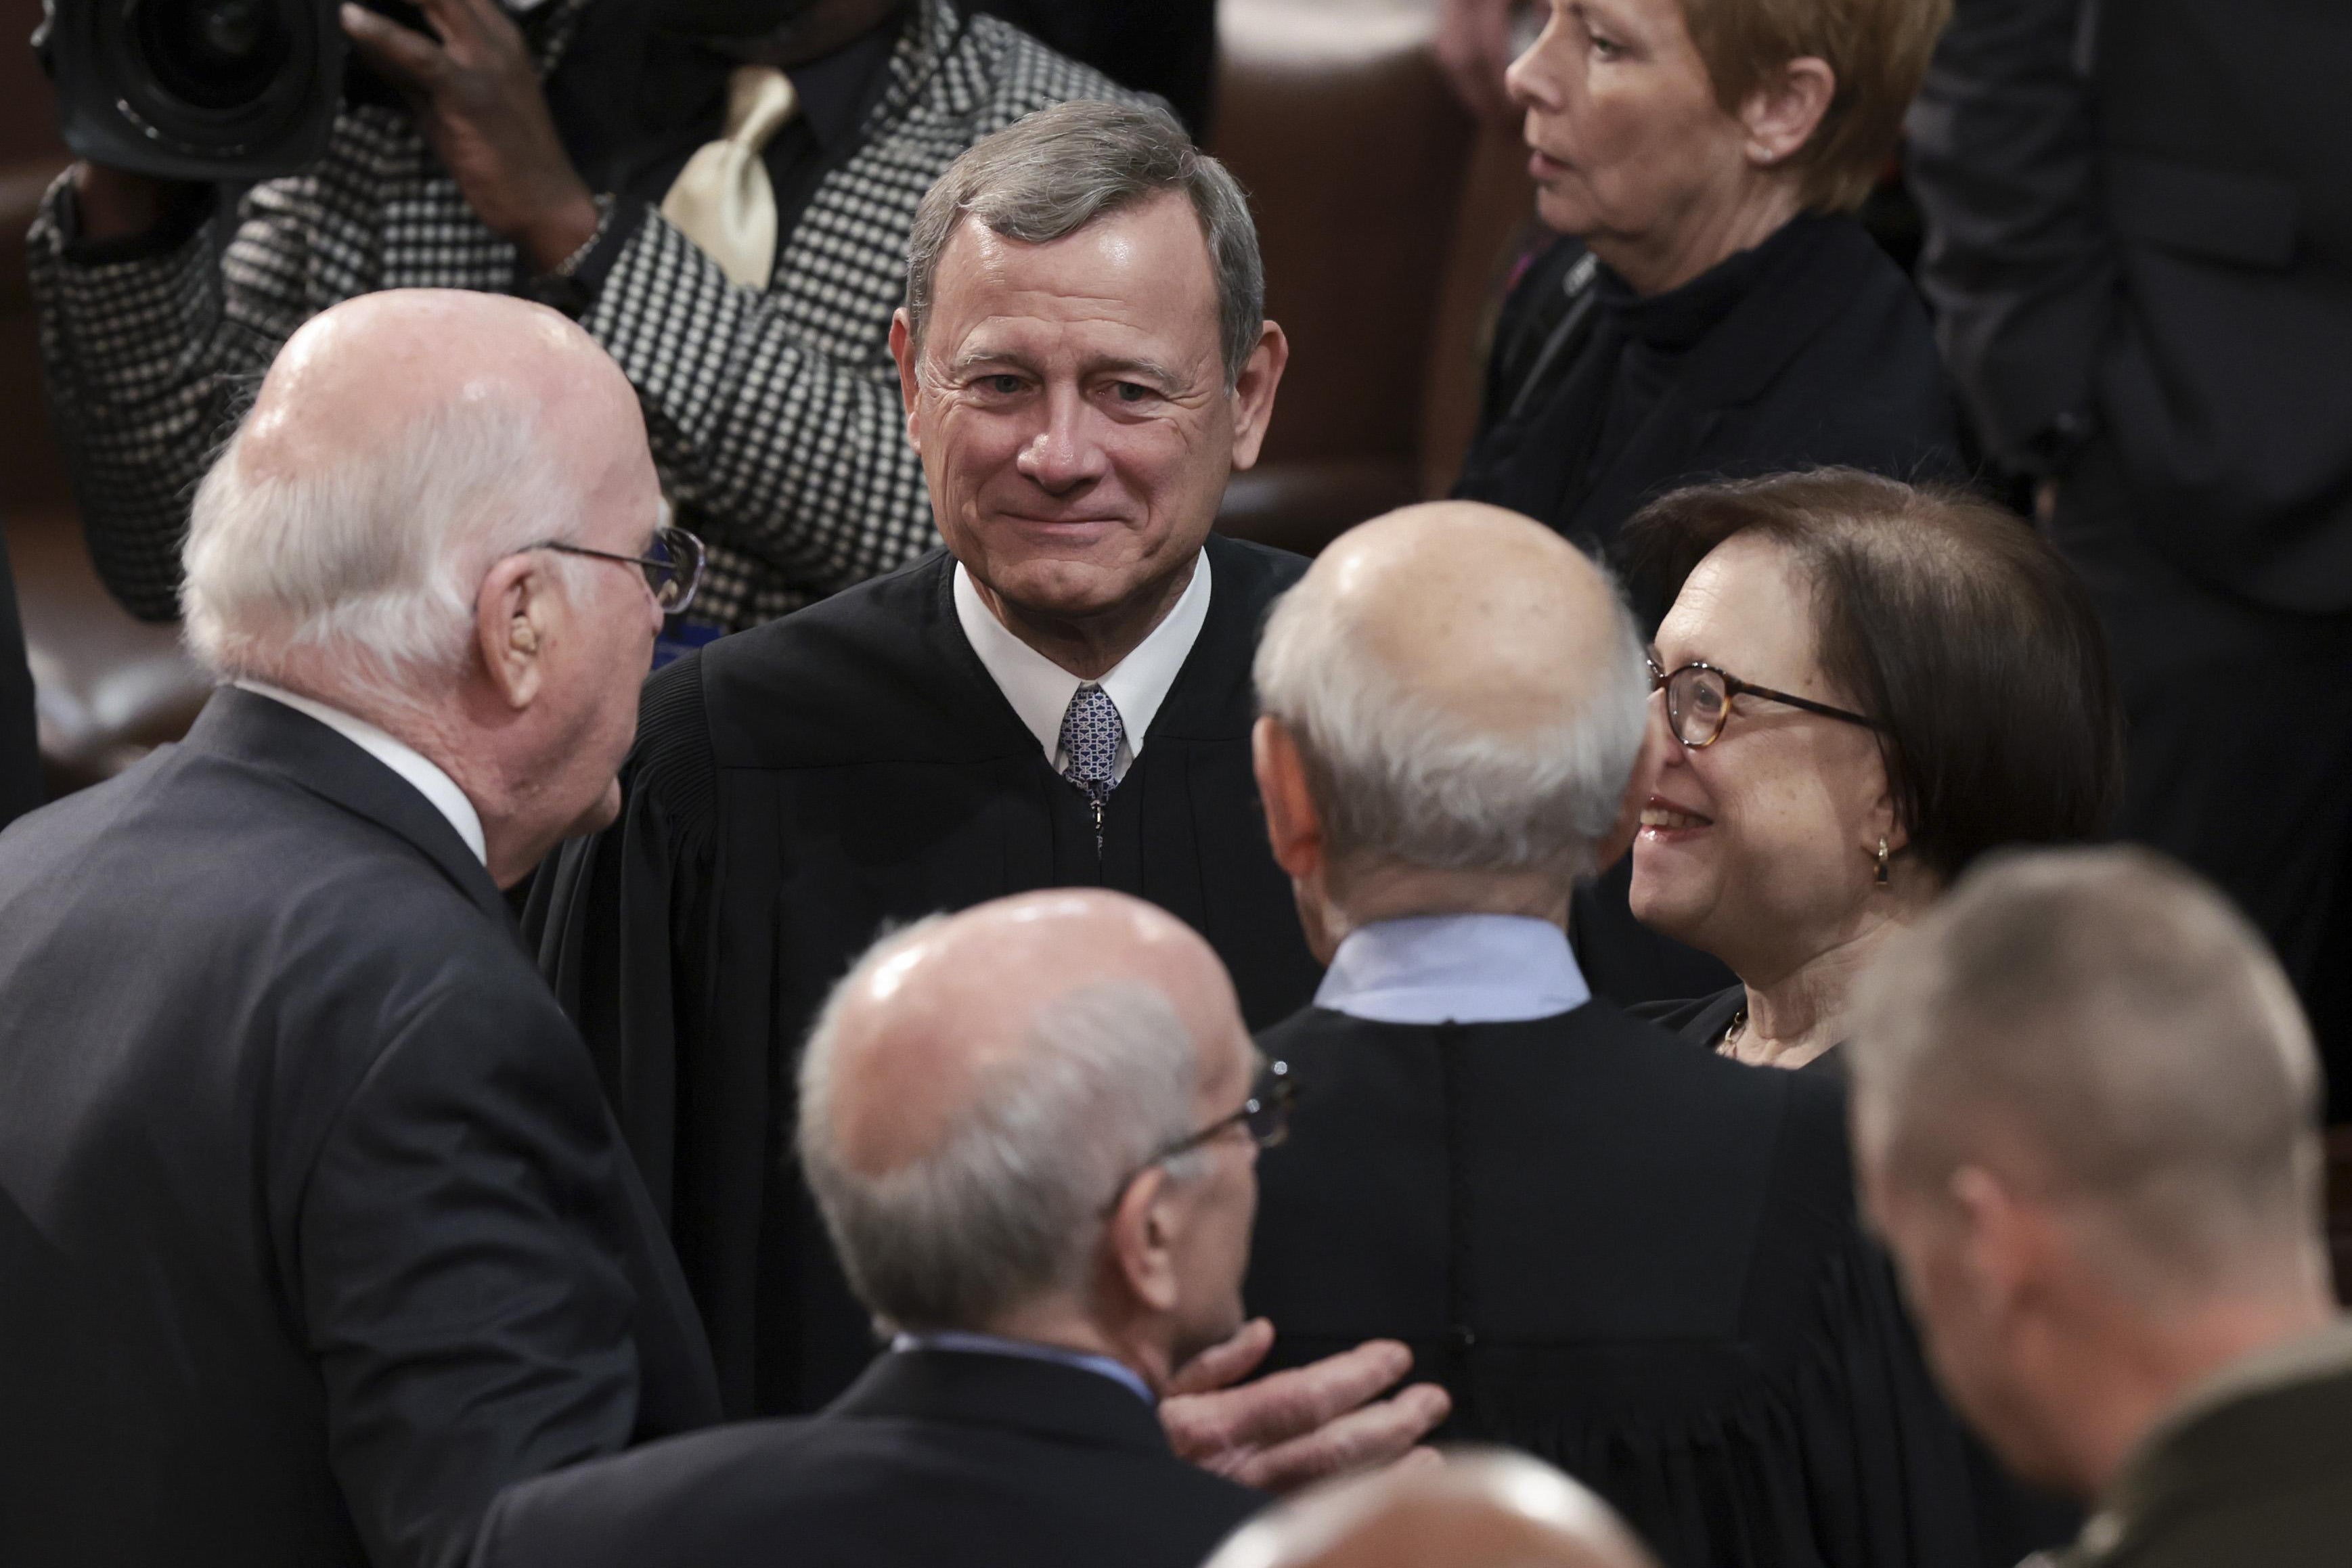 People crowd around John Roberts, in his robe, and Elena Kagan is next to him.